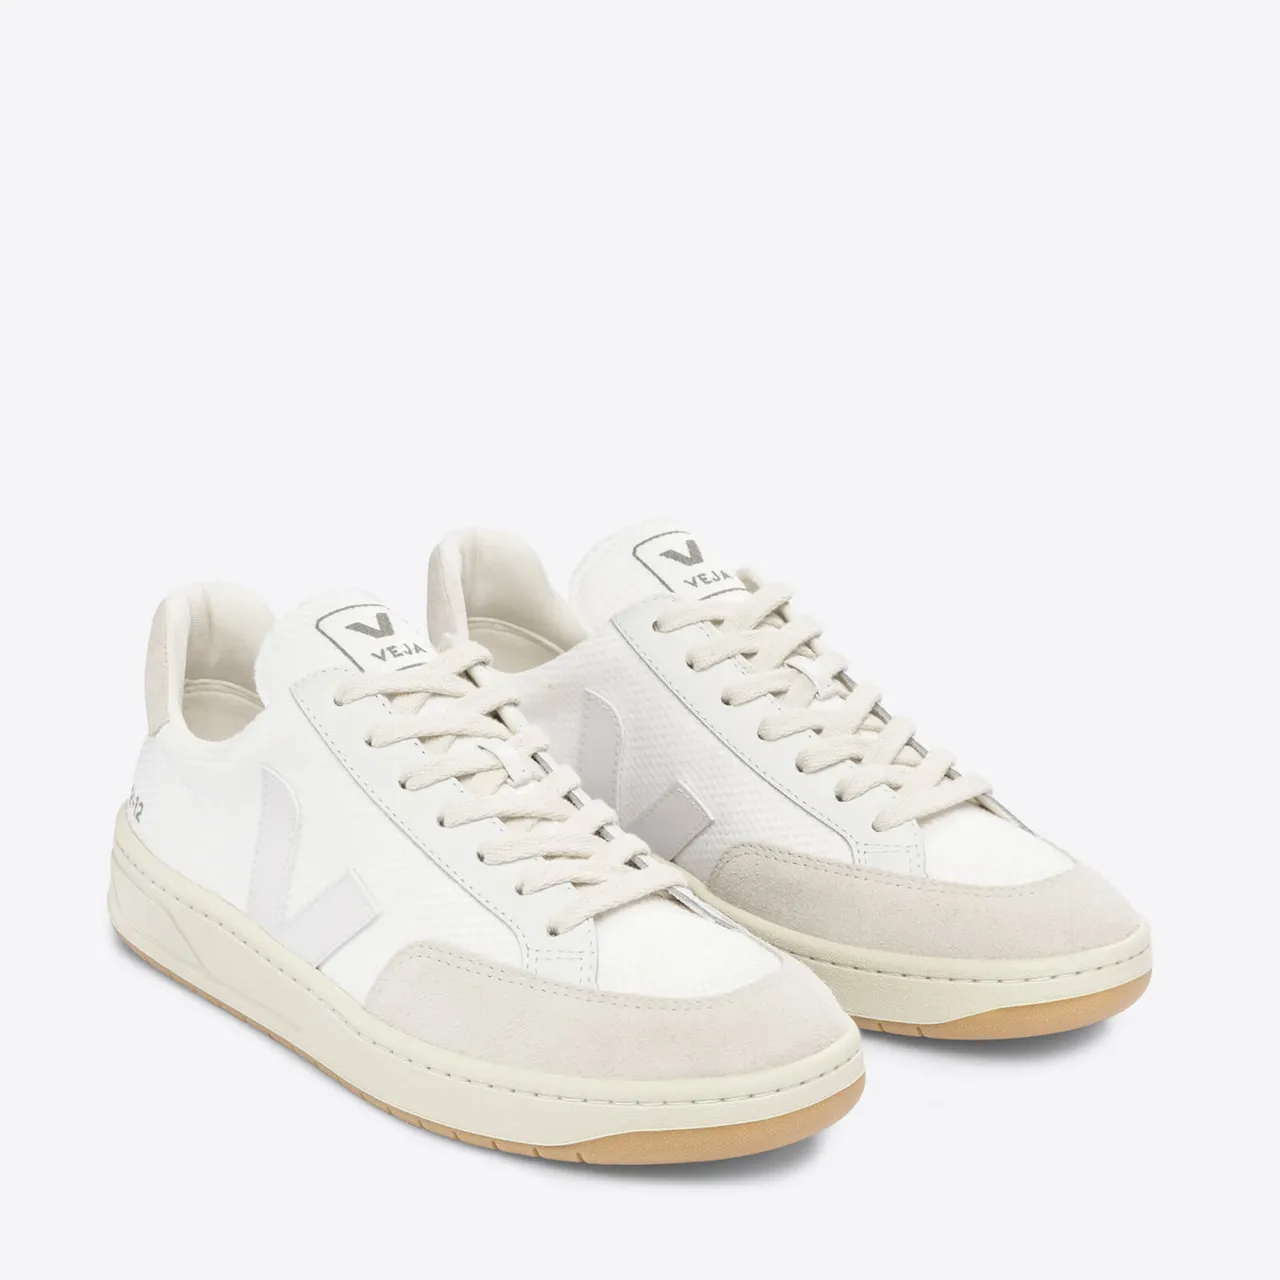 Veja Men’s V-12 B Mesh and Suede Trainers - UK